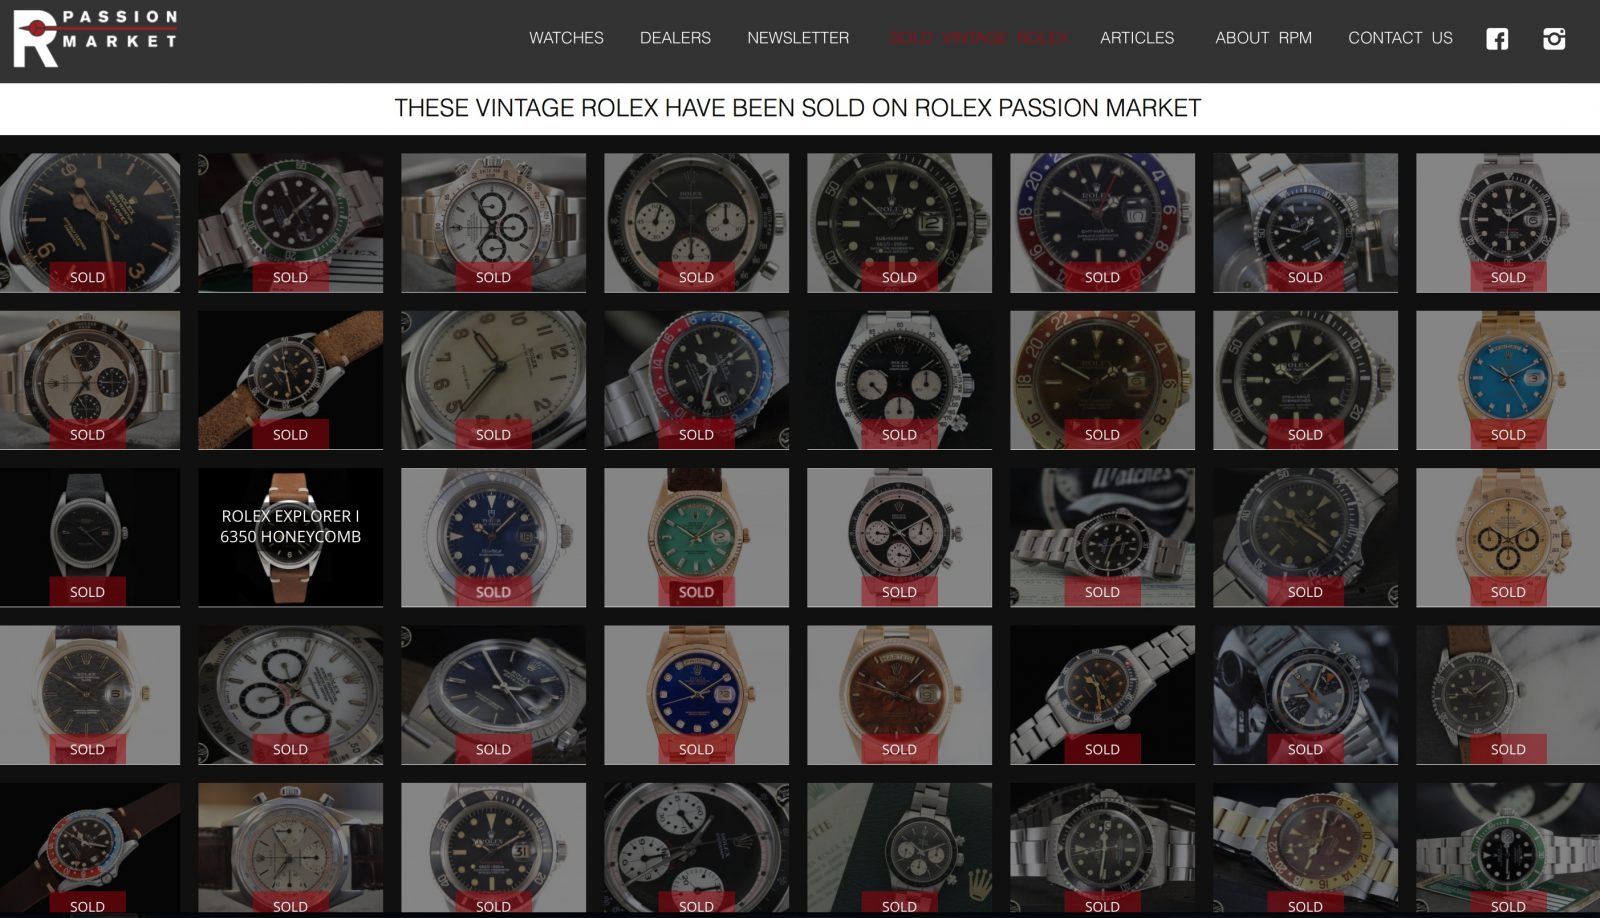 The 20 x Trusted RPM Vintage Rolex 